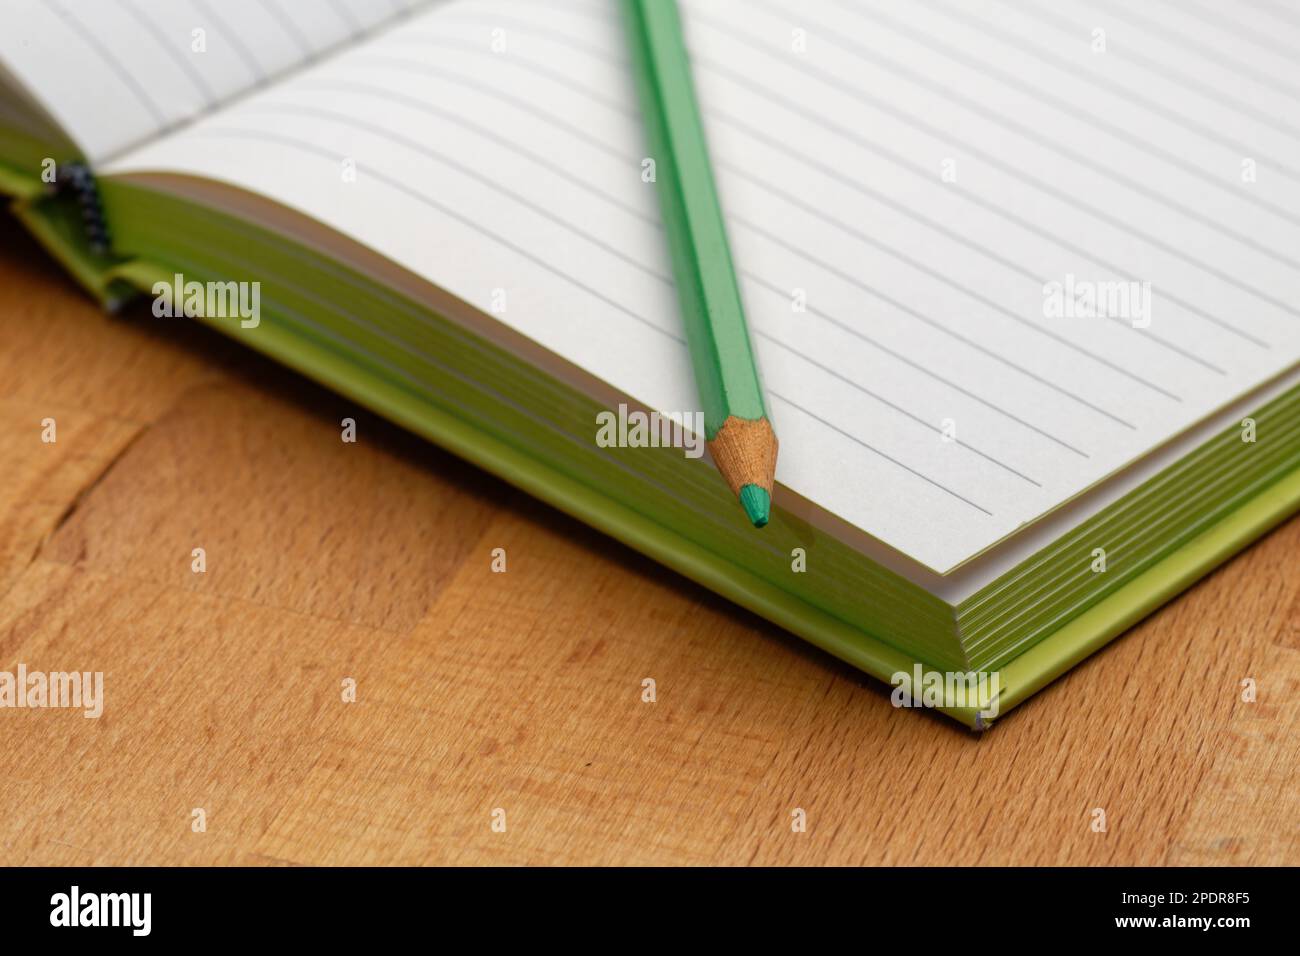 A lined notebook with a green pencil. Ready to take notes, sketch ideas and write plans. Pencil and paper at the ready. Stock Photo